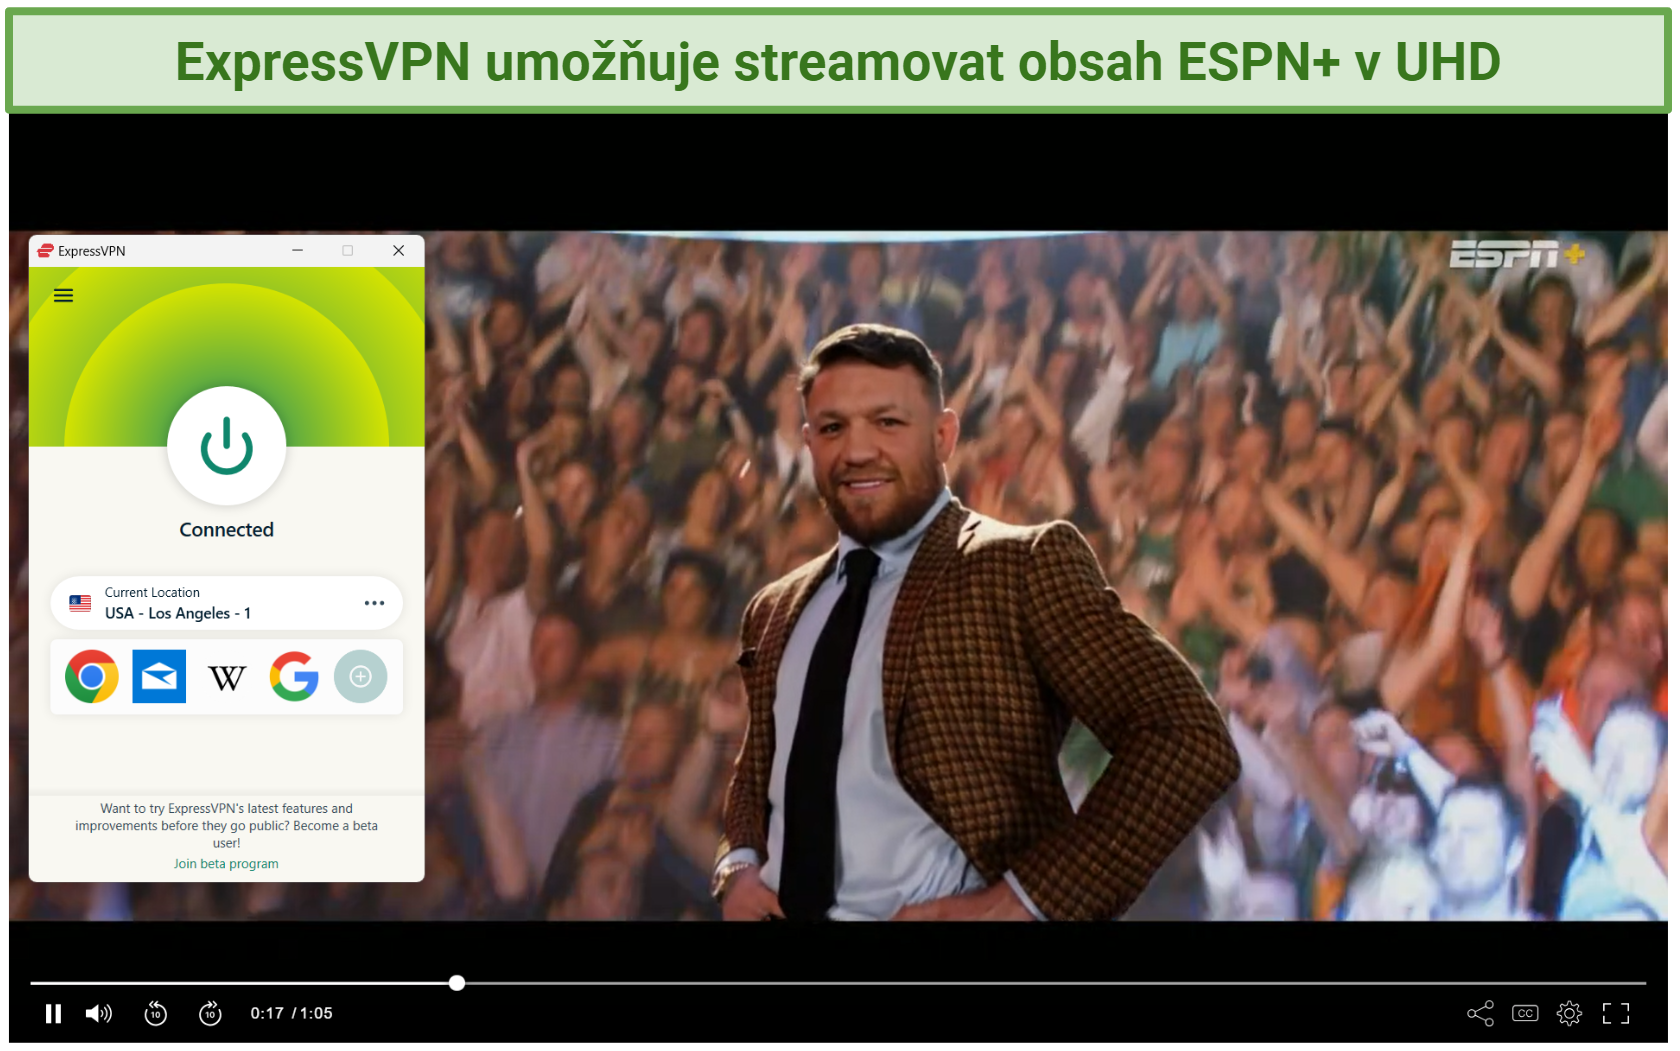 A screenshot of sports on ESPN+ while connected to an ExpressVPN server in the US